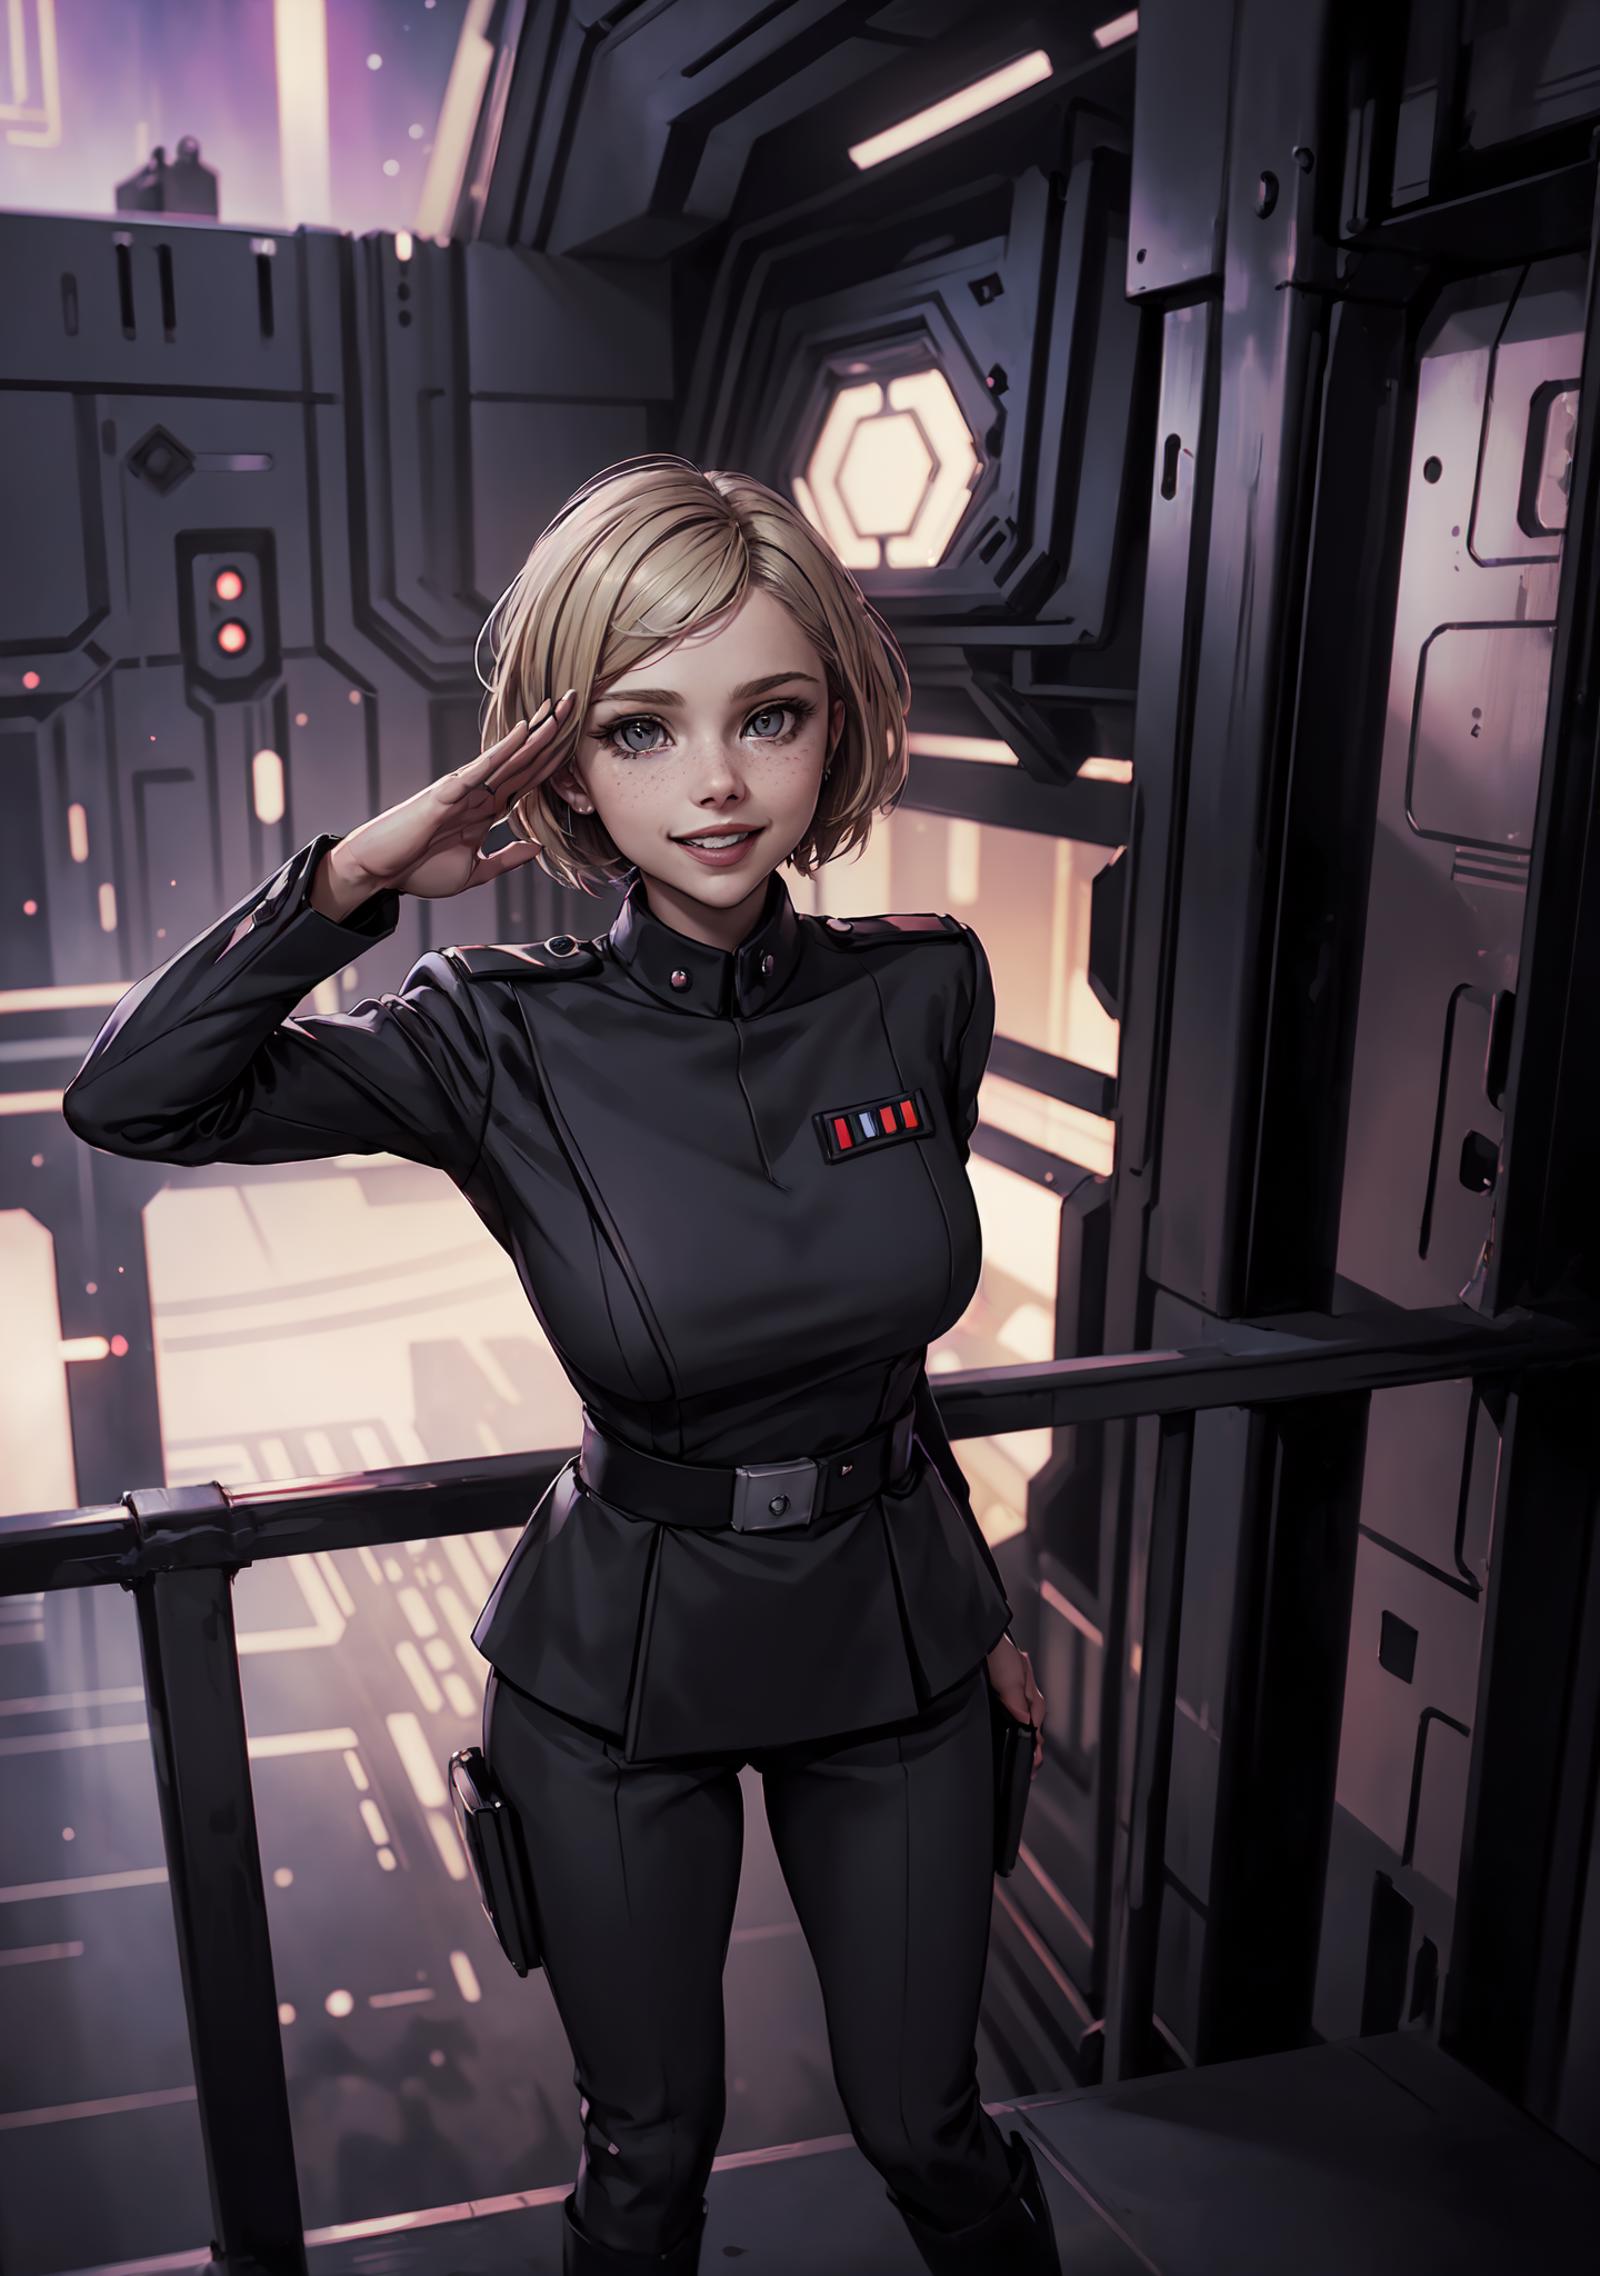 Star Wars imperial officer uniform image by Crow_Mauler